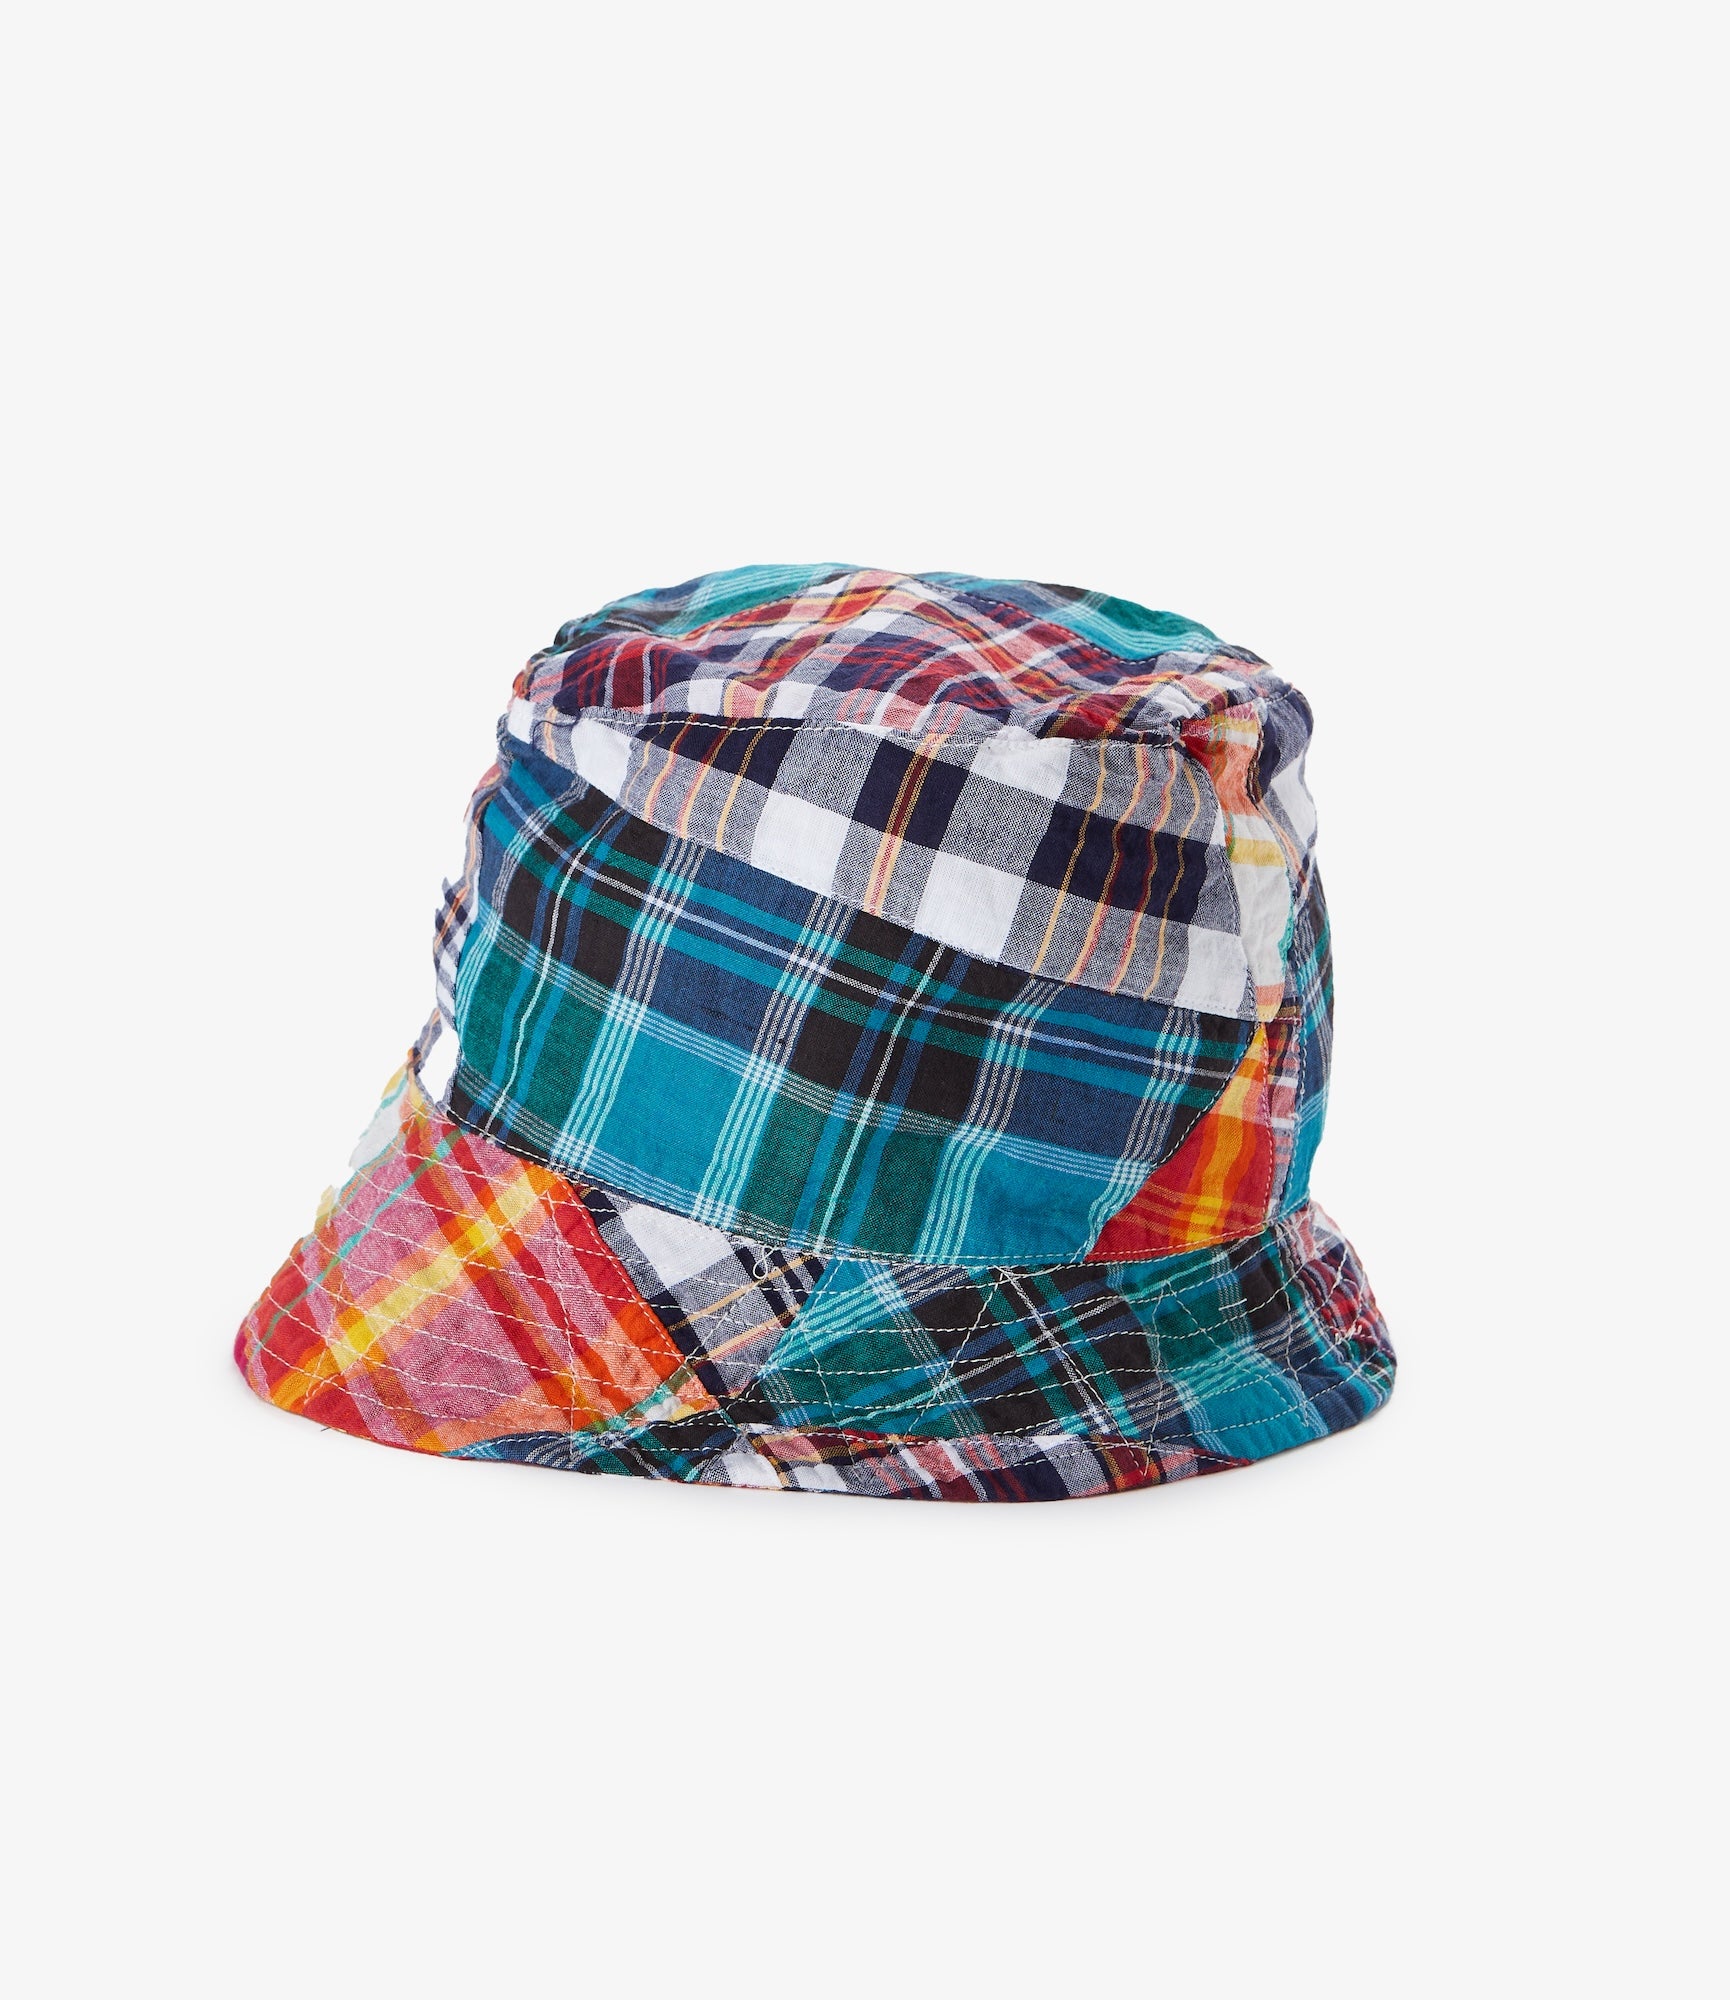 Engineered Garments Bucket Hat - Multi Color Triangle Patchwork Madras